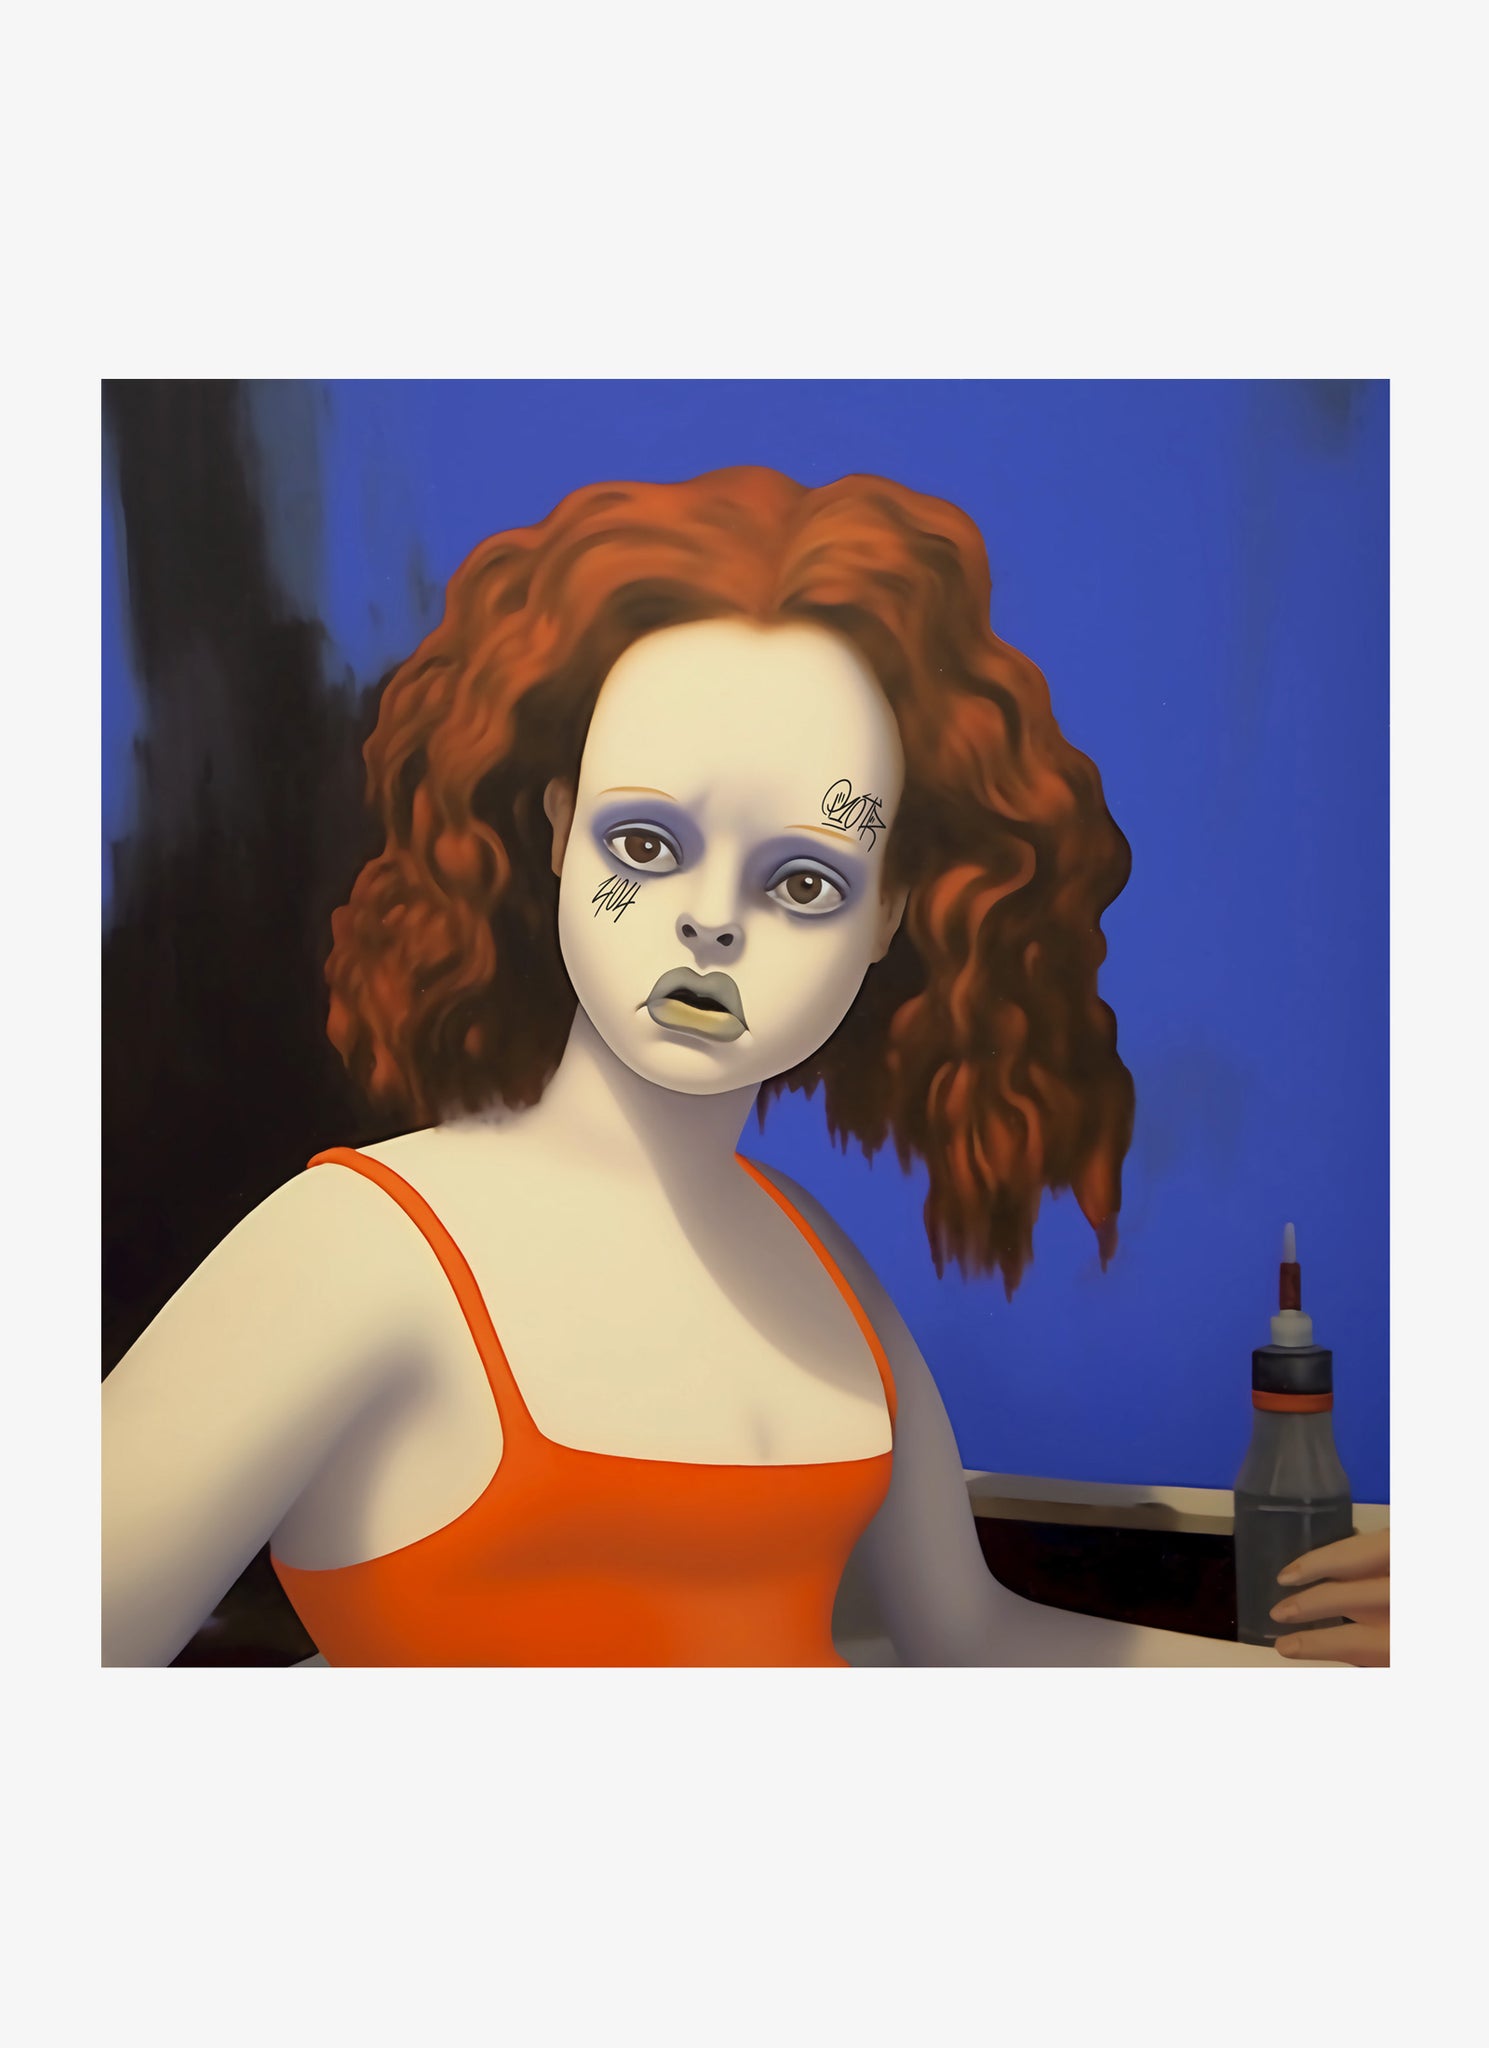 Piotr404 - More Barbecue Sauce? (limited edition print)